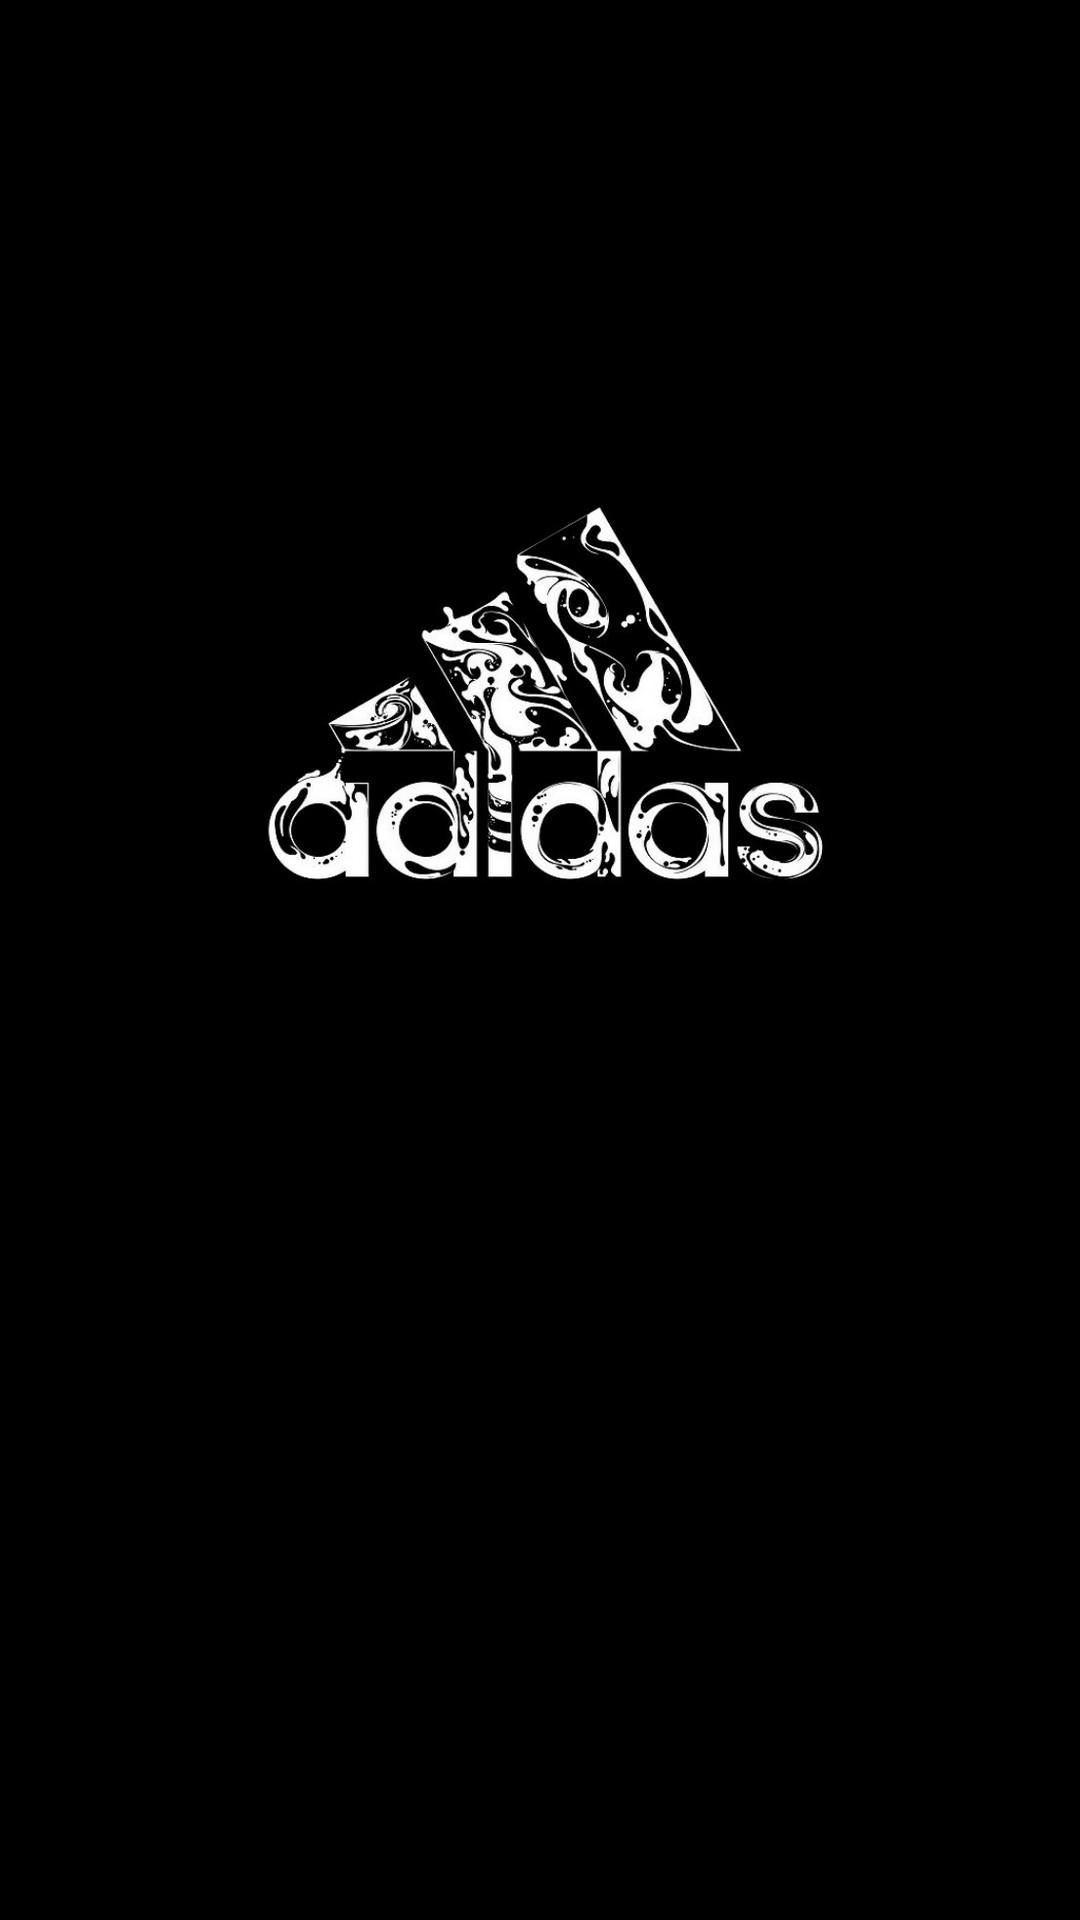 adidas android